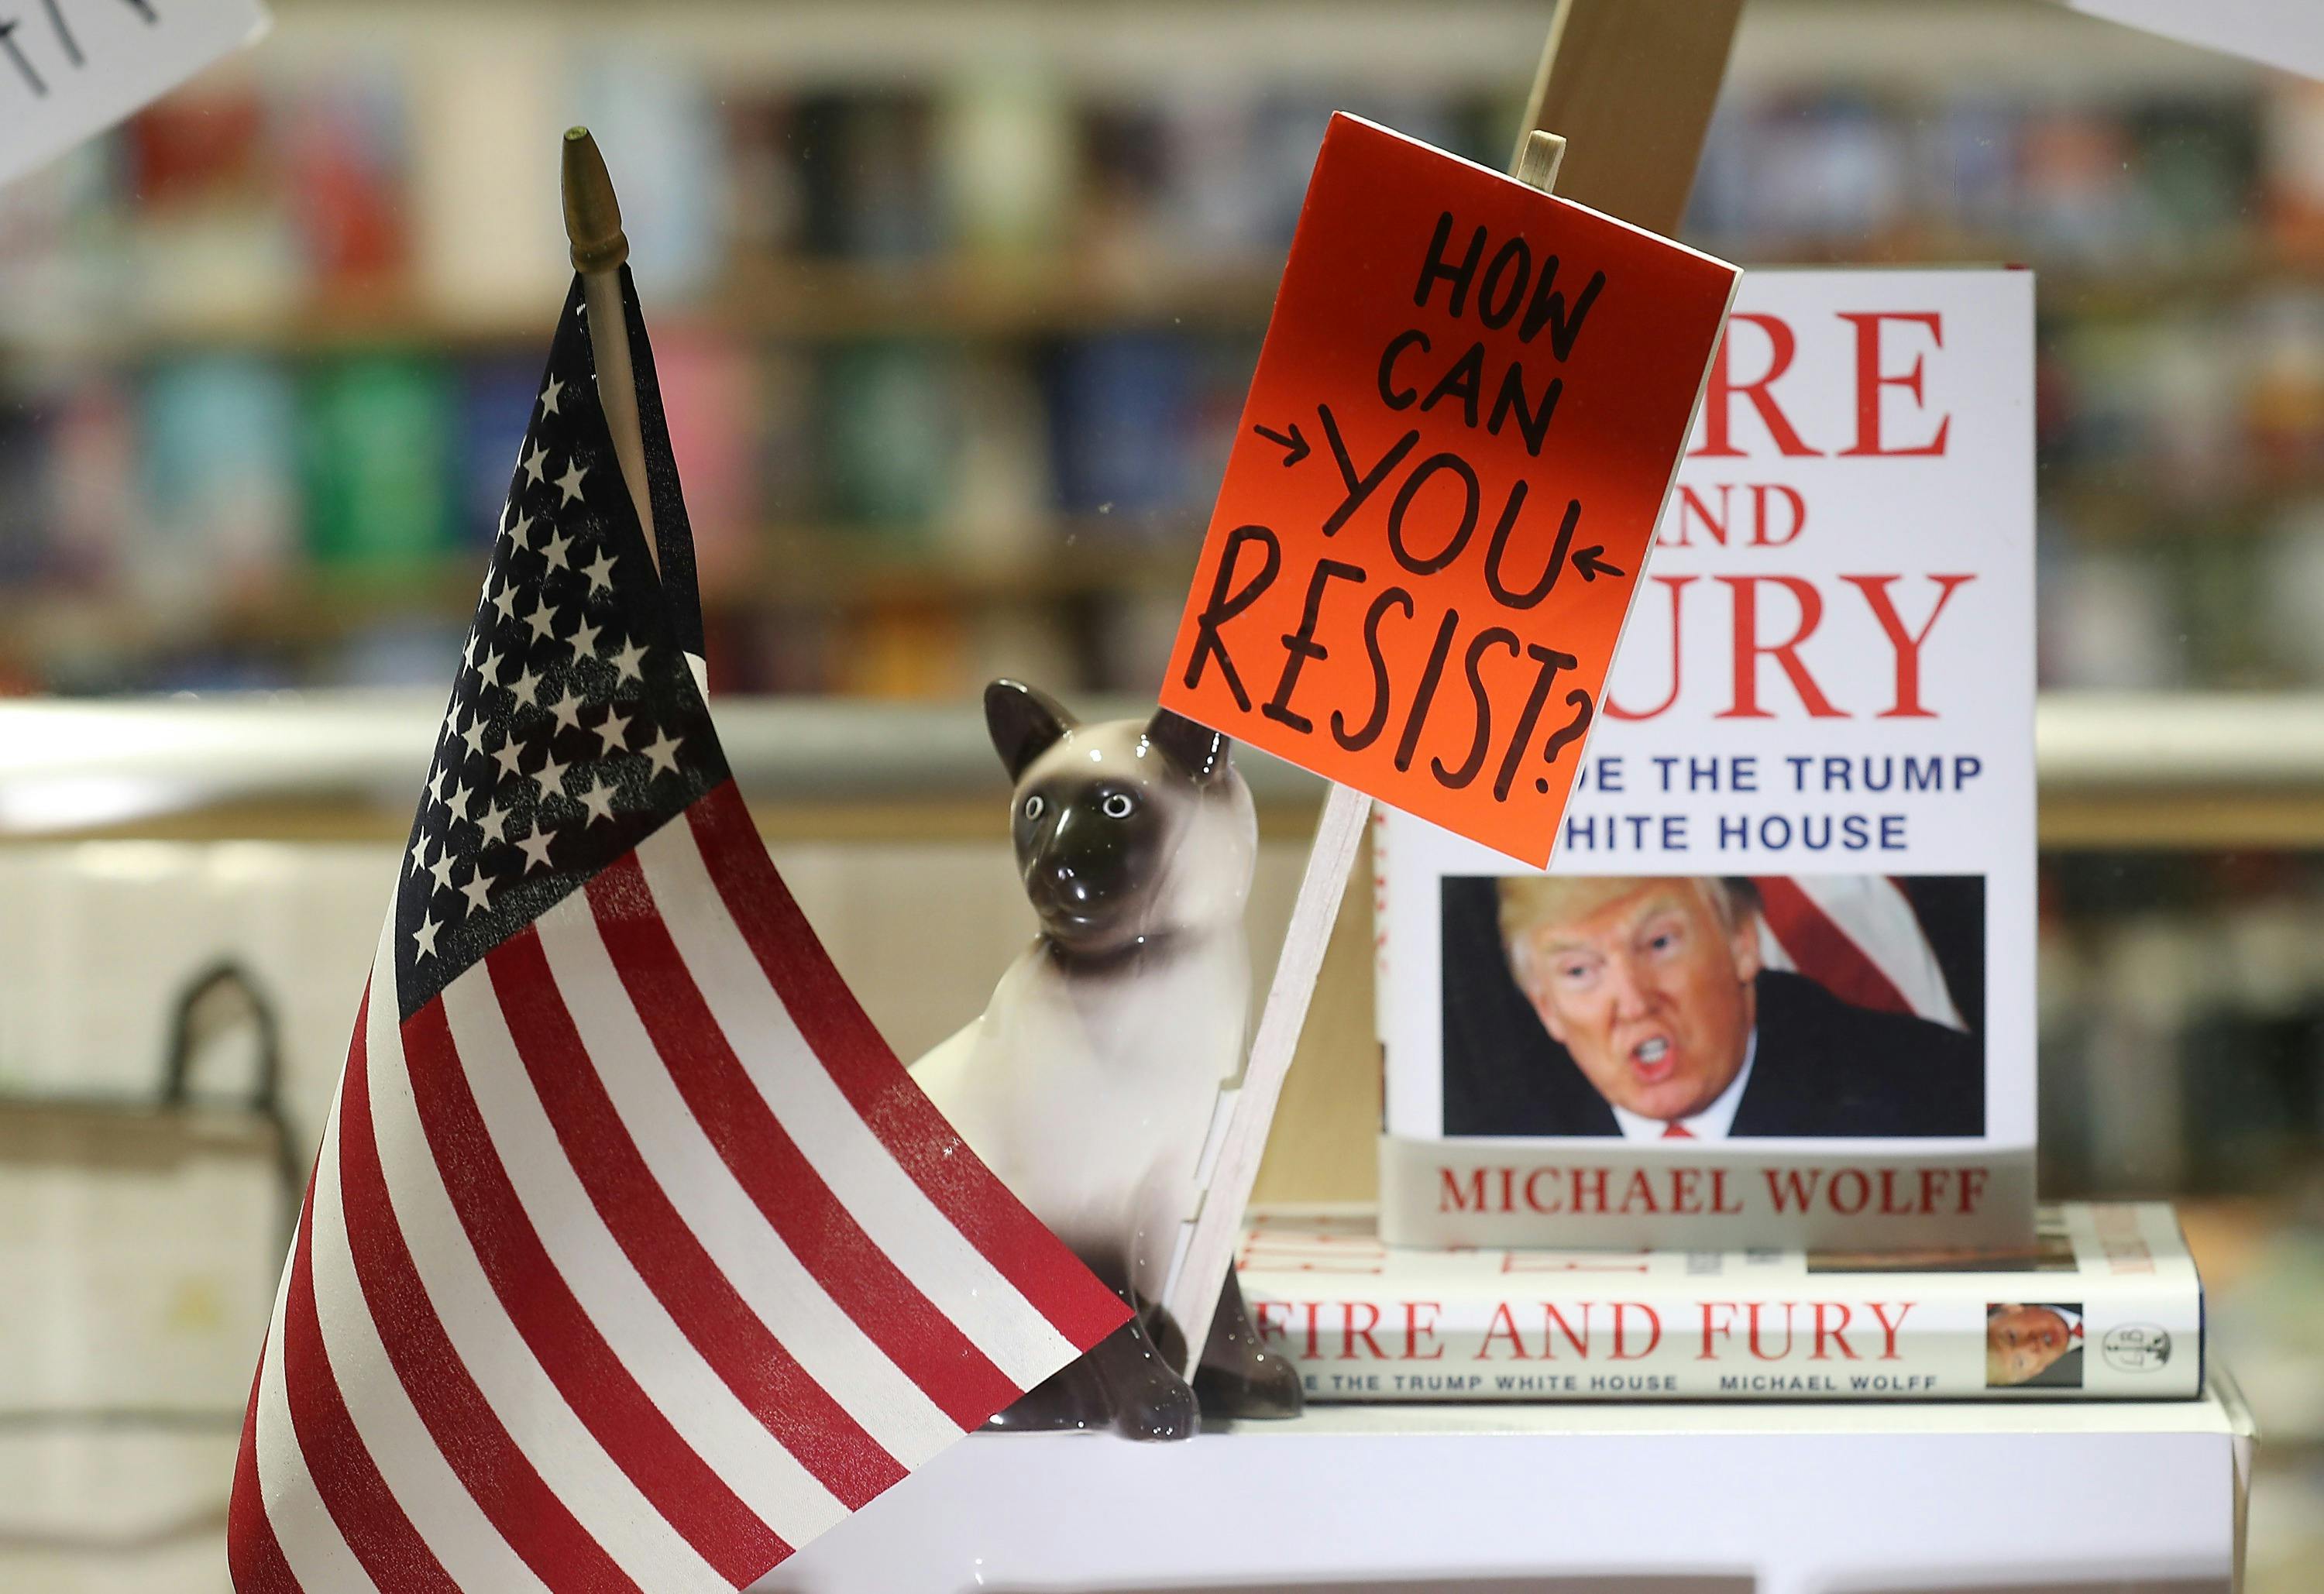 The Helpless Outrage of the Anti-Trump Book thumbnail